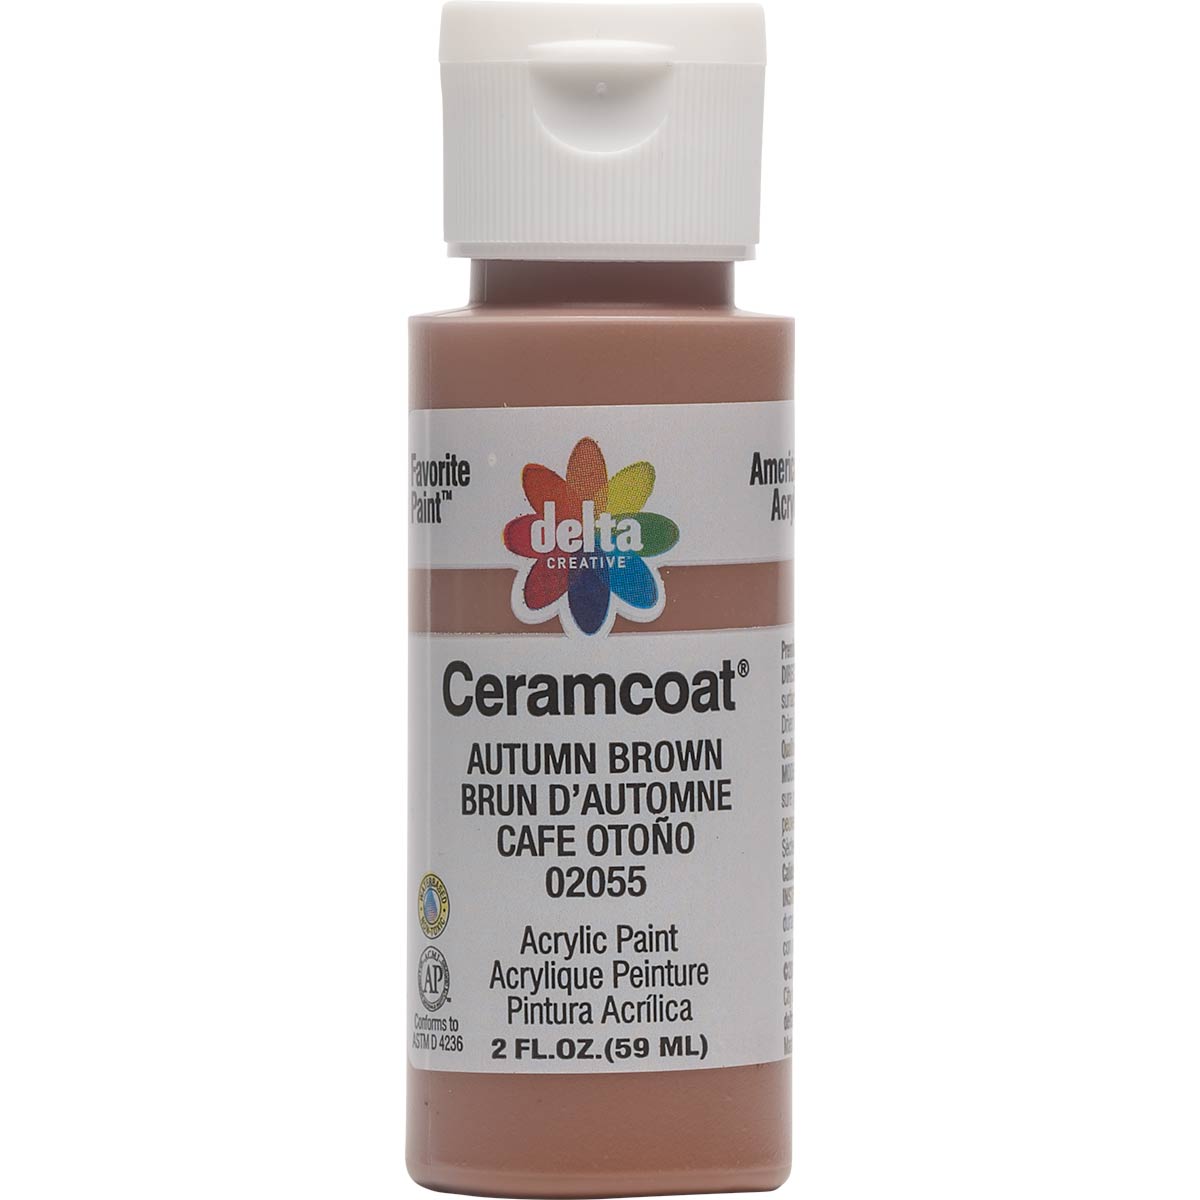 Delta Ceramcoat Acrylic Paint 2oz-Bambi Brown - Opaque